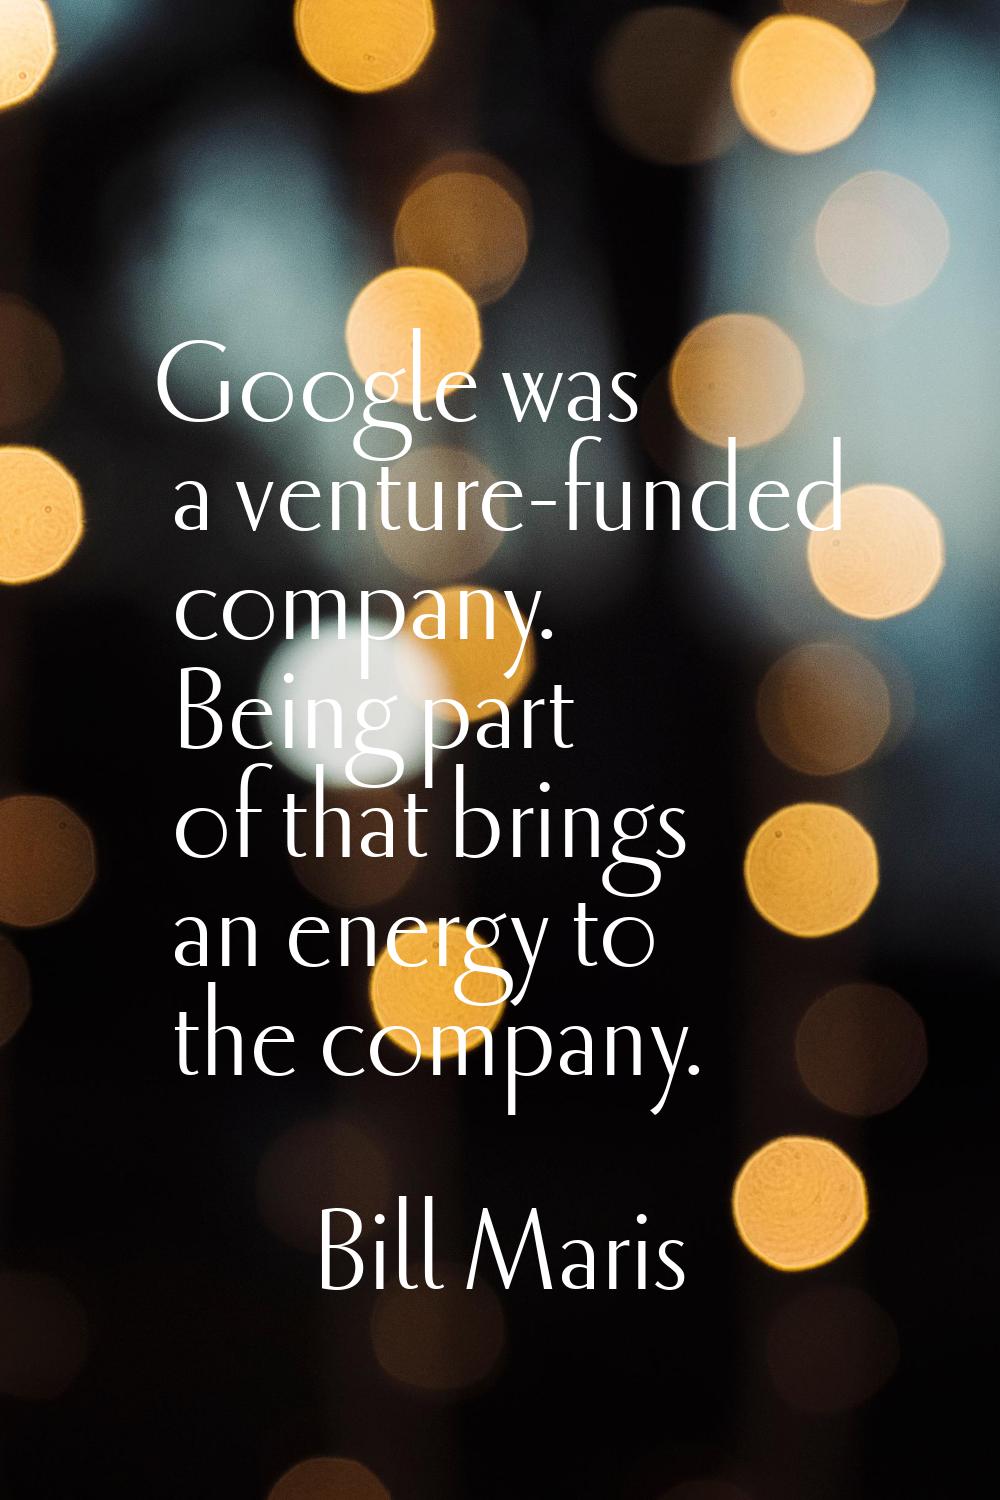 Google was a venture-funded company. Being part of that brings an energy to the company.